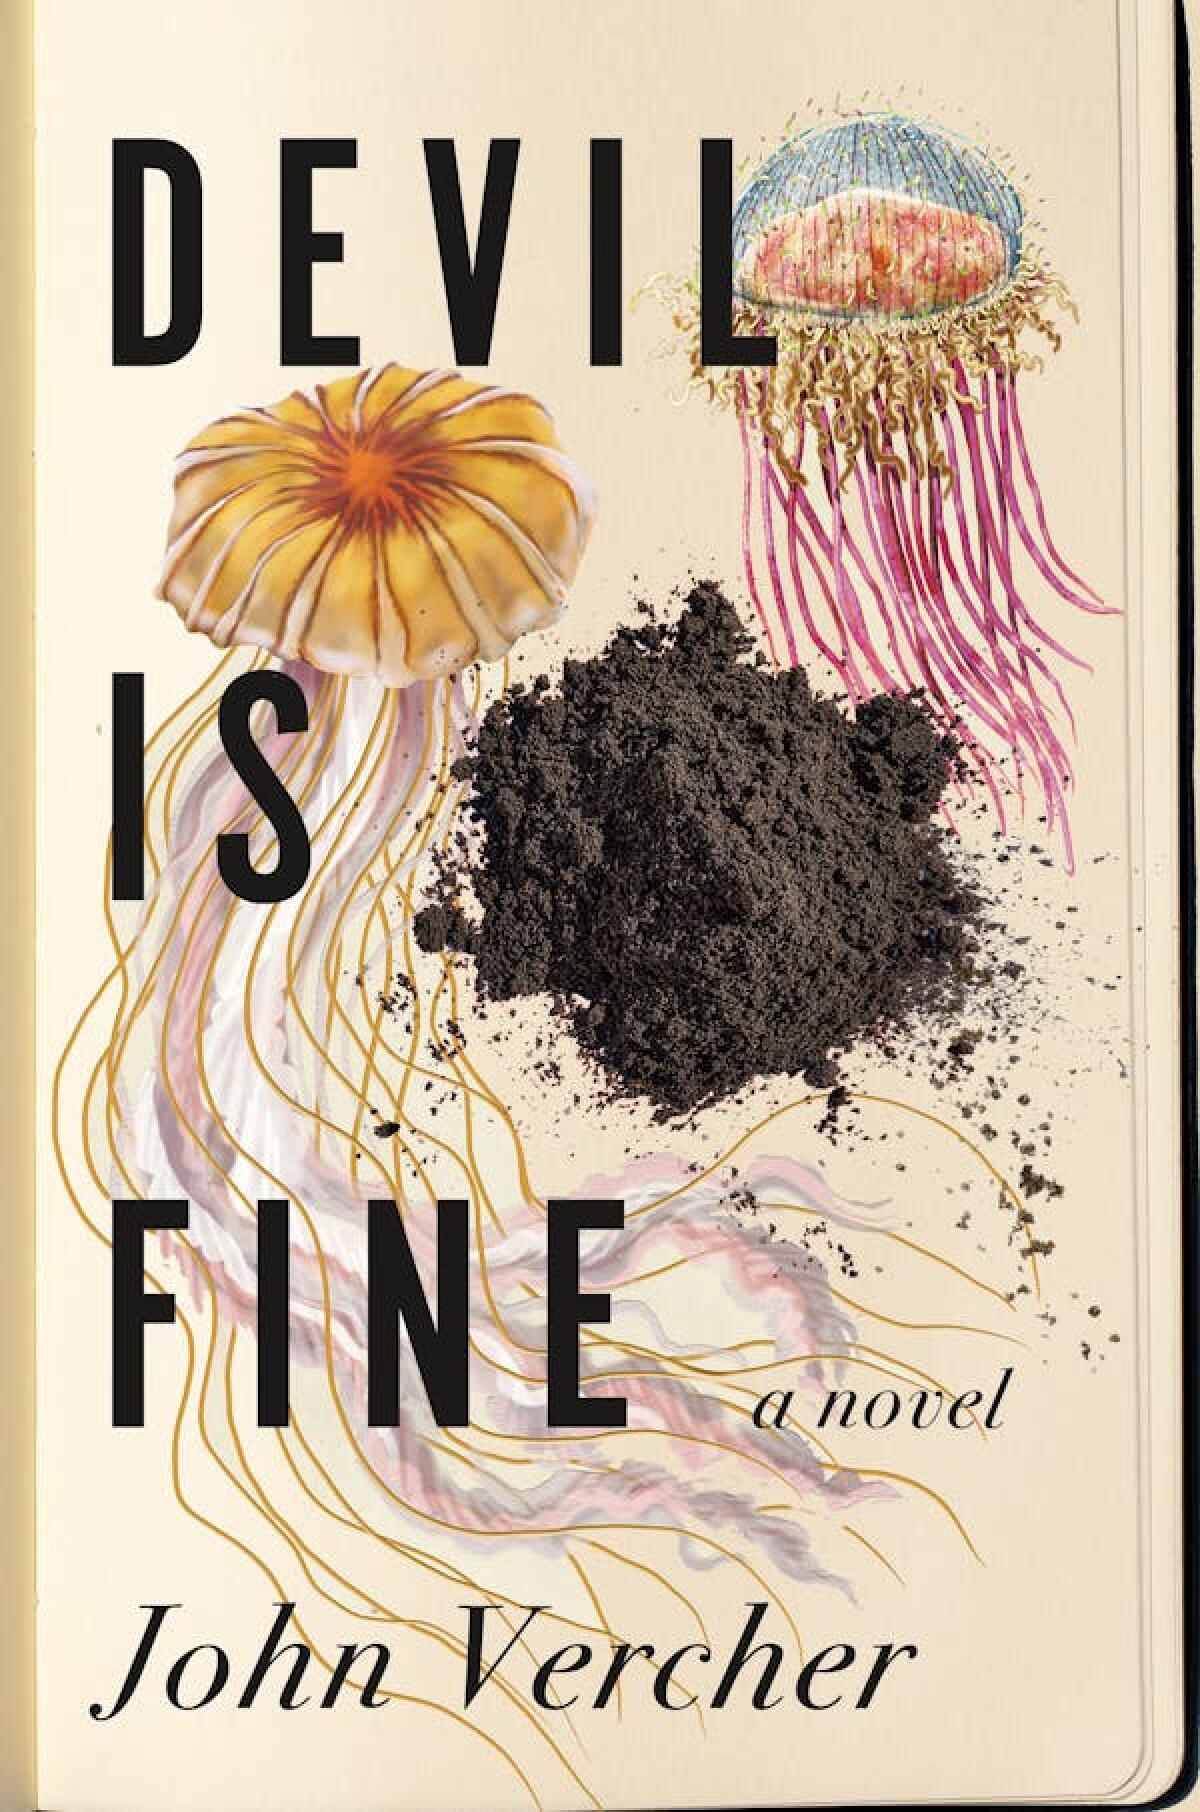 the cover of "The devil is fine"